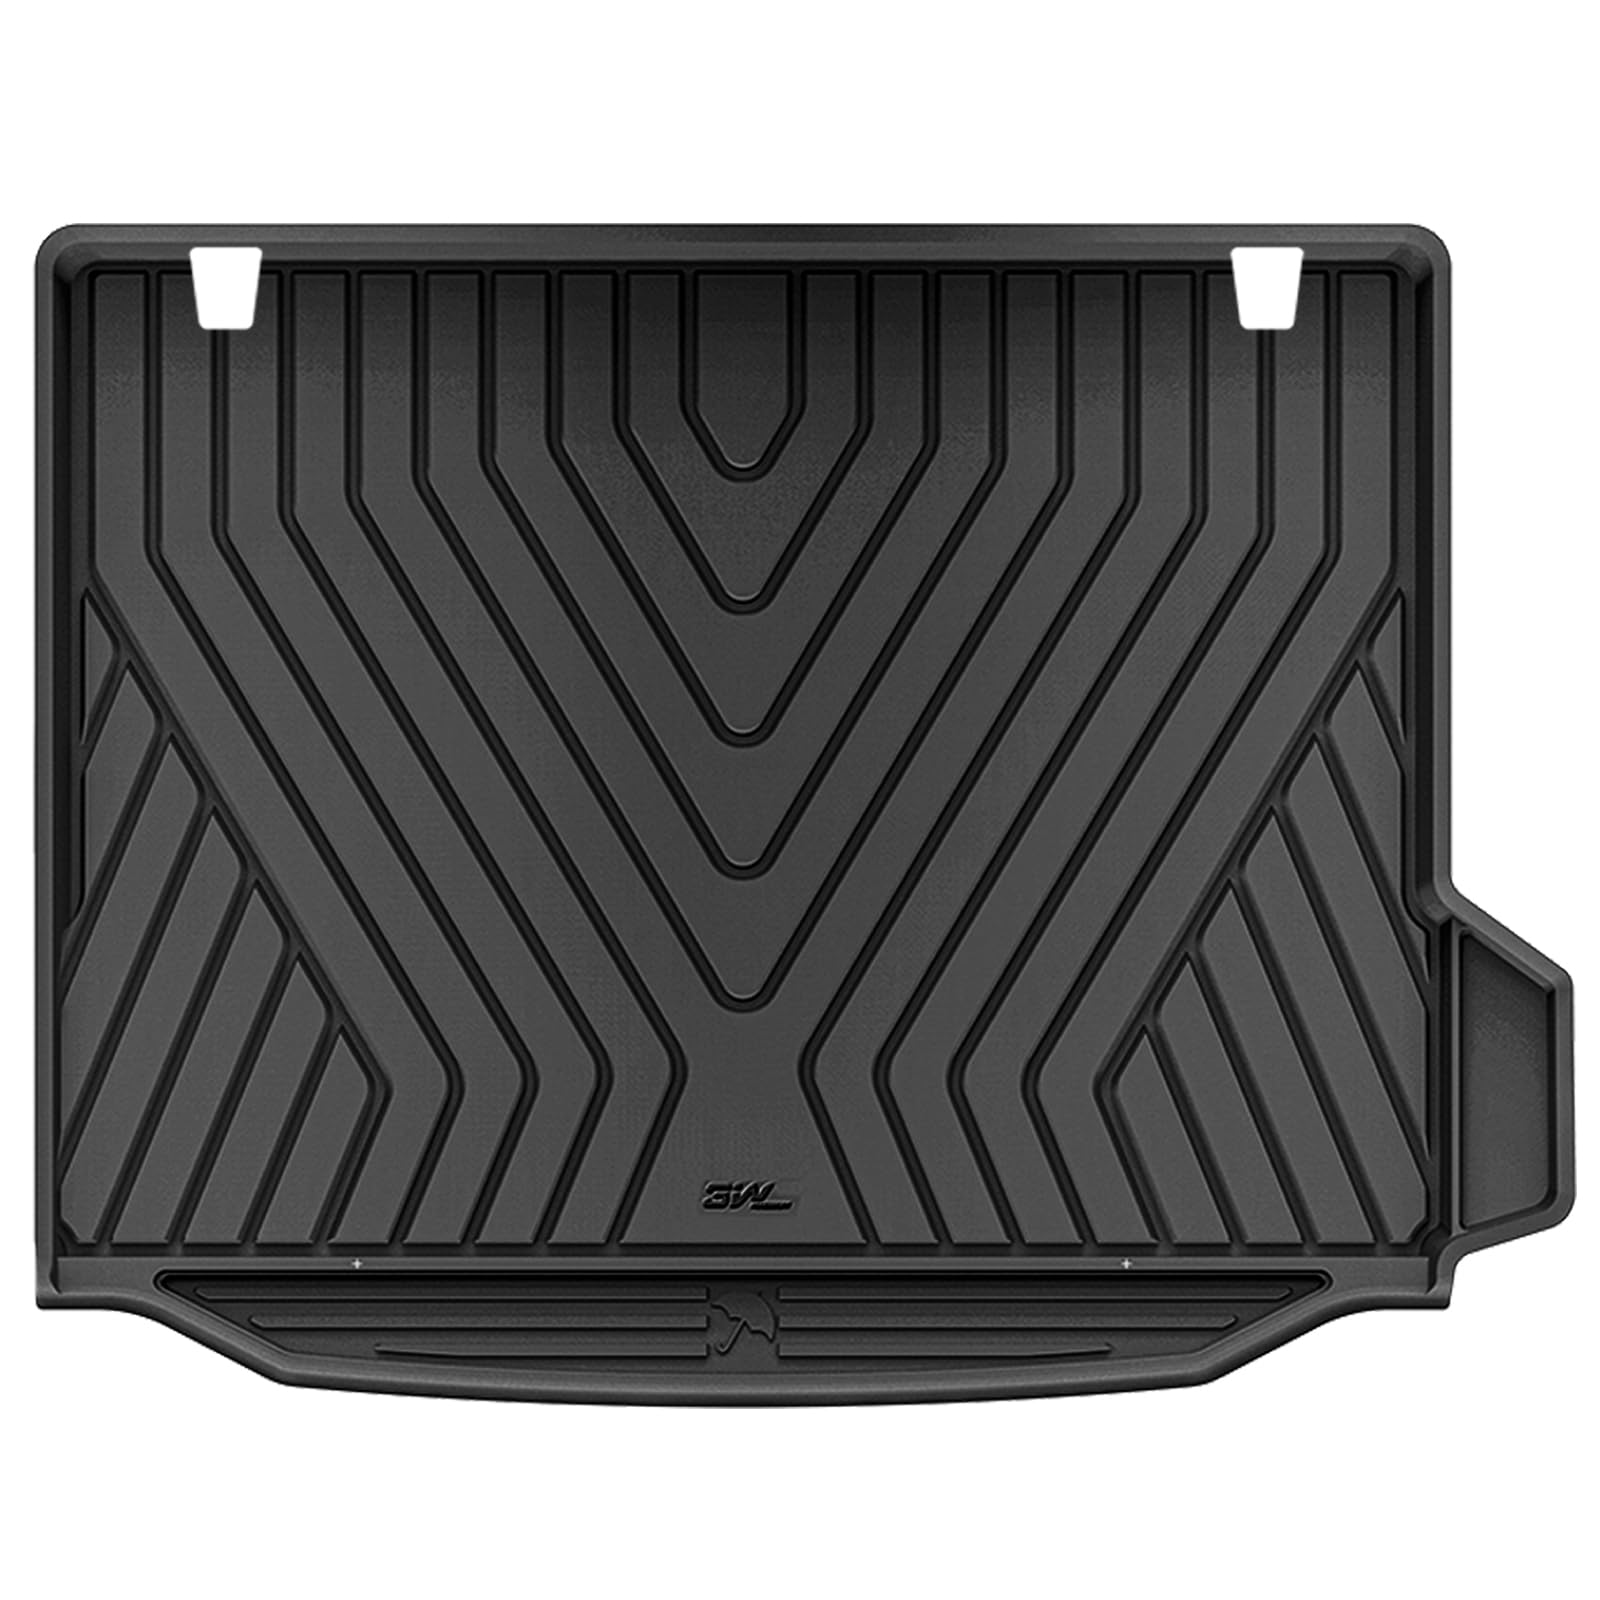 3W BMW 2019-2024 X4 M M40i xDrive30i Floor Mats & Cargo Mats TPE Material & All-Weather Protection Vehicles & Parts 3W 2019-2024 X4 2019-2024 Trunk Mat